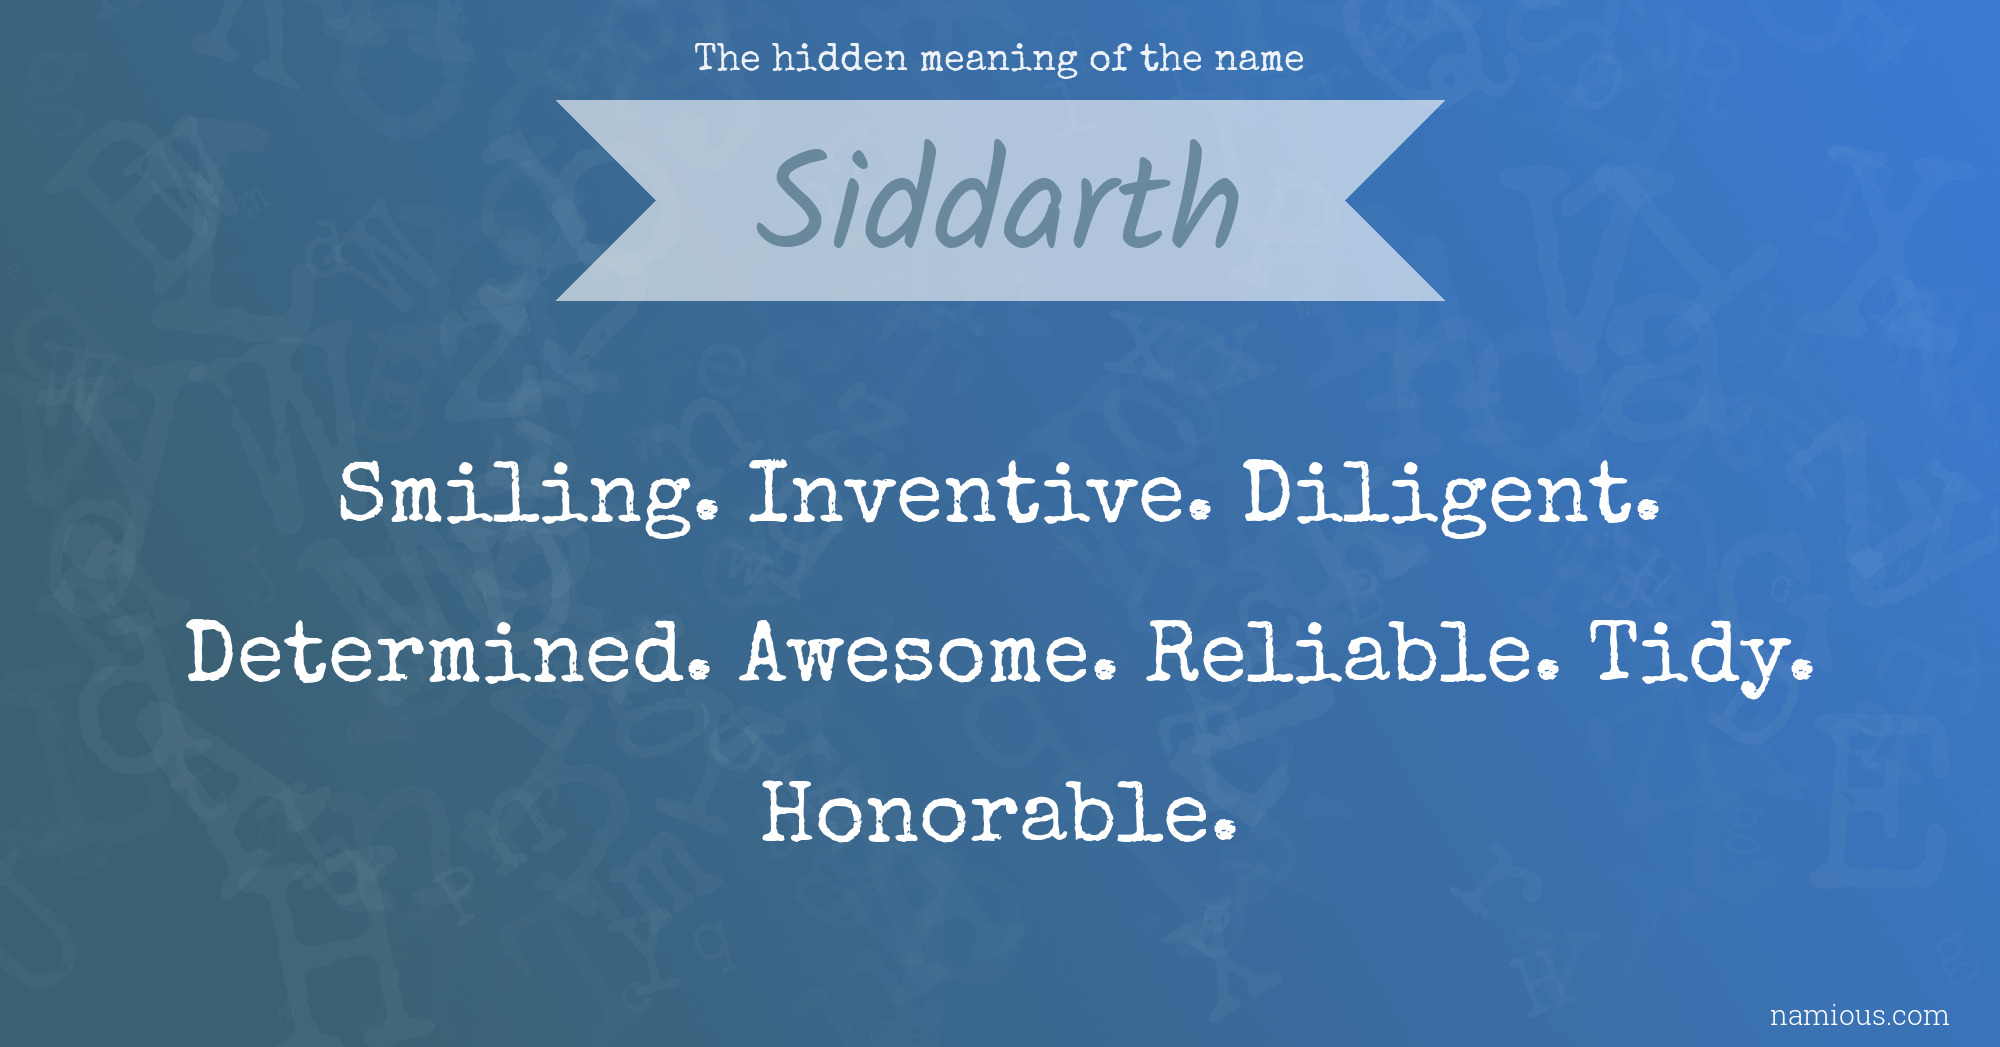 The hidden meaning of the name Siddarth